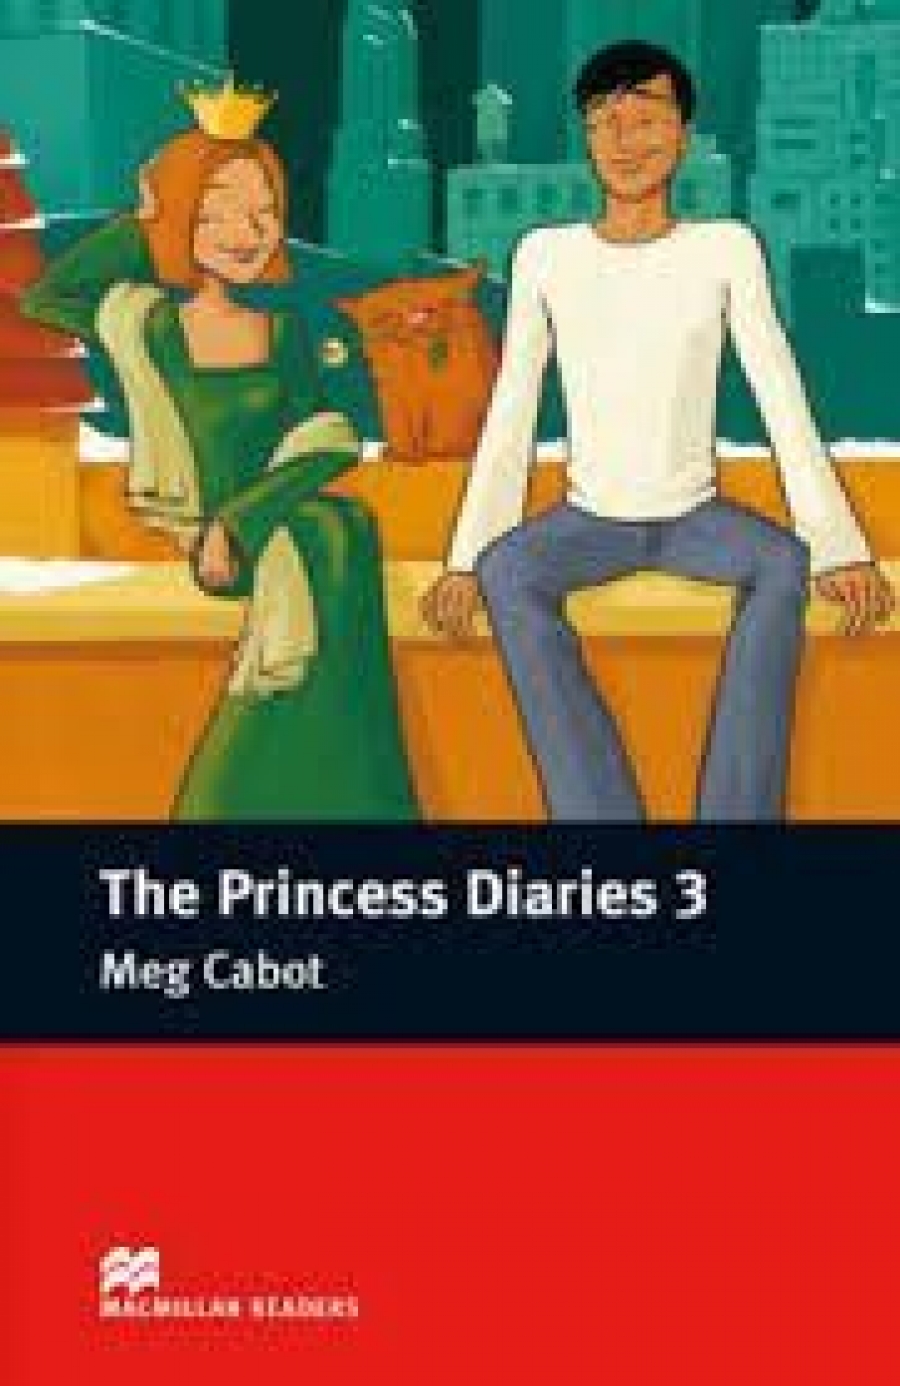 Meg Cabot, retold by Anne Collins The Princess Diaries: Book 3 (with Audio CD) 